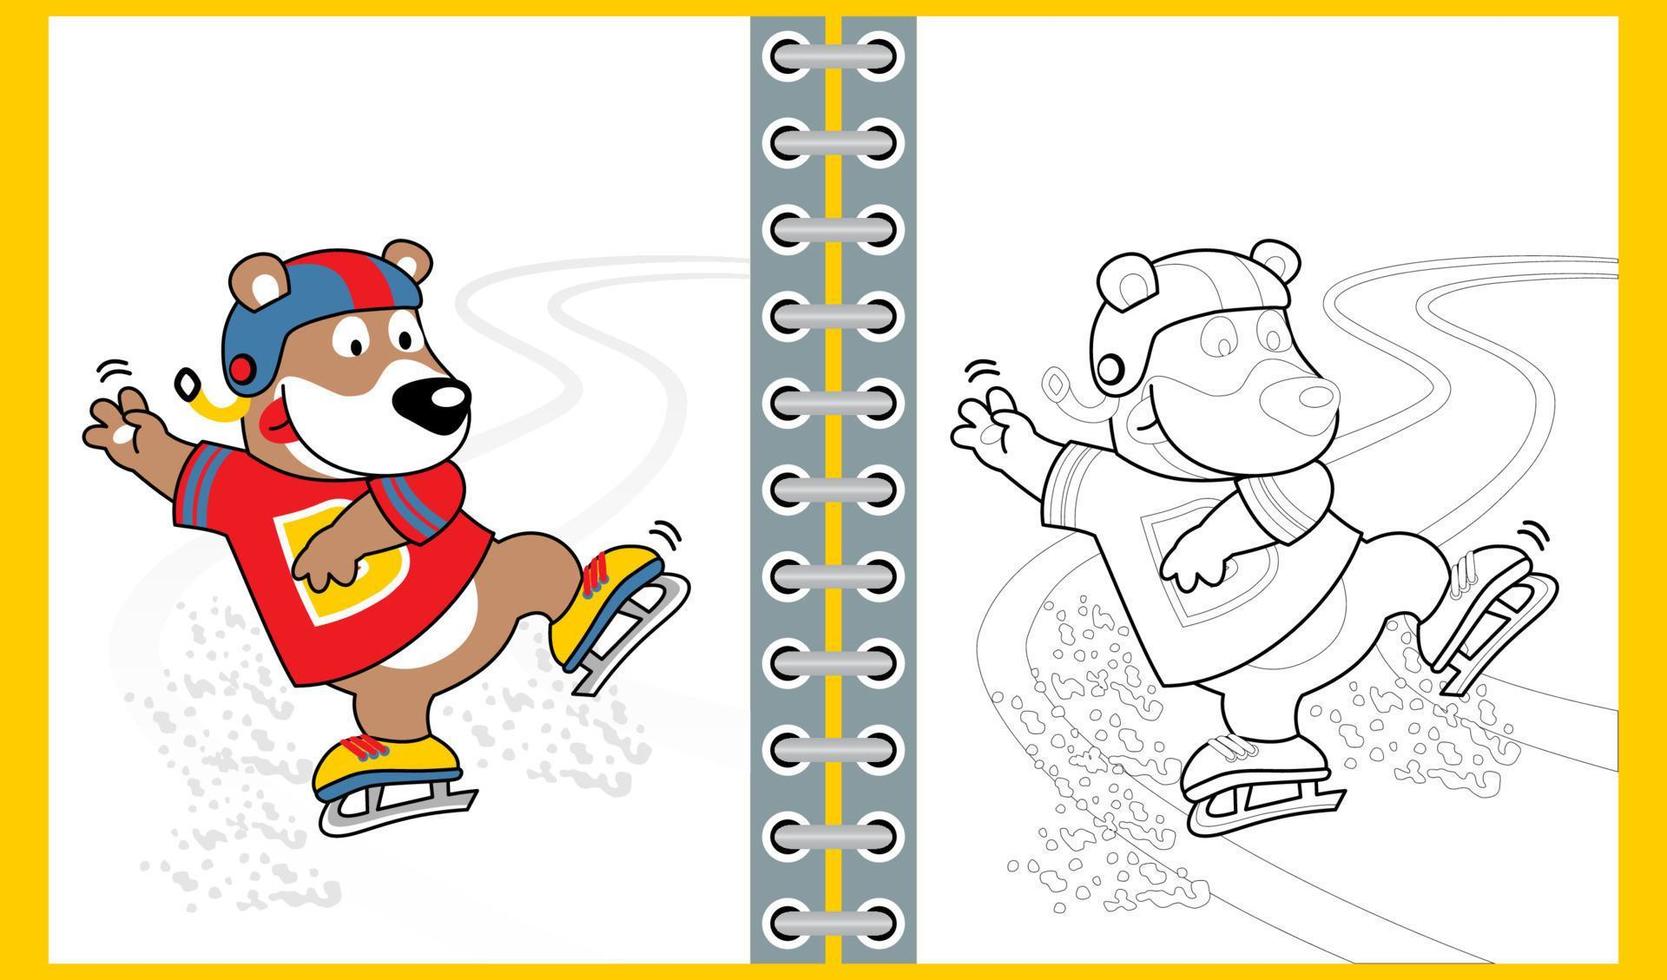 Ice skating with funny bear, coloring book or page, vector cartoon illustration